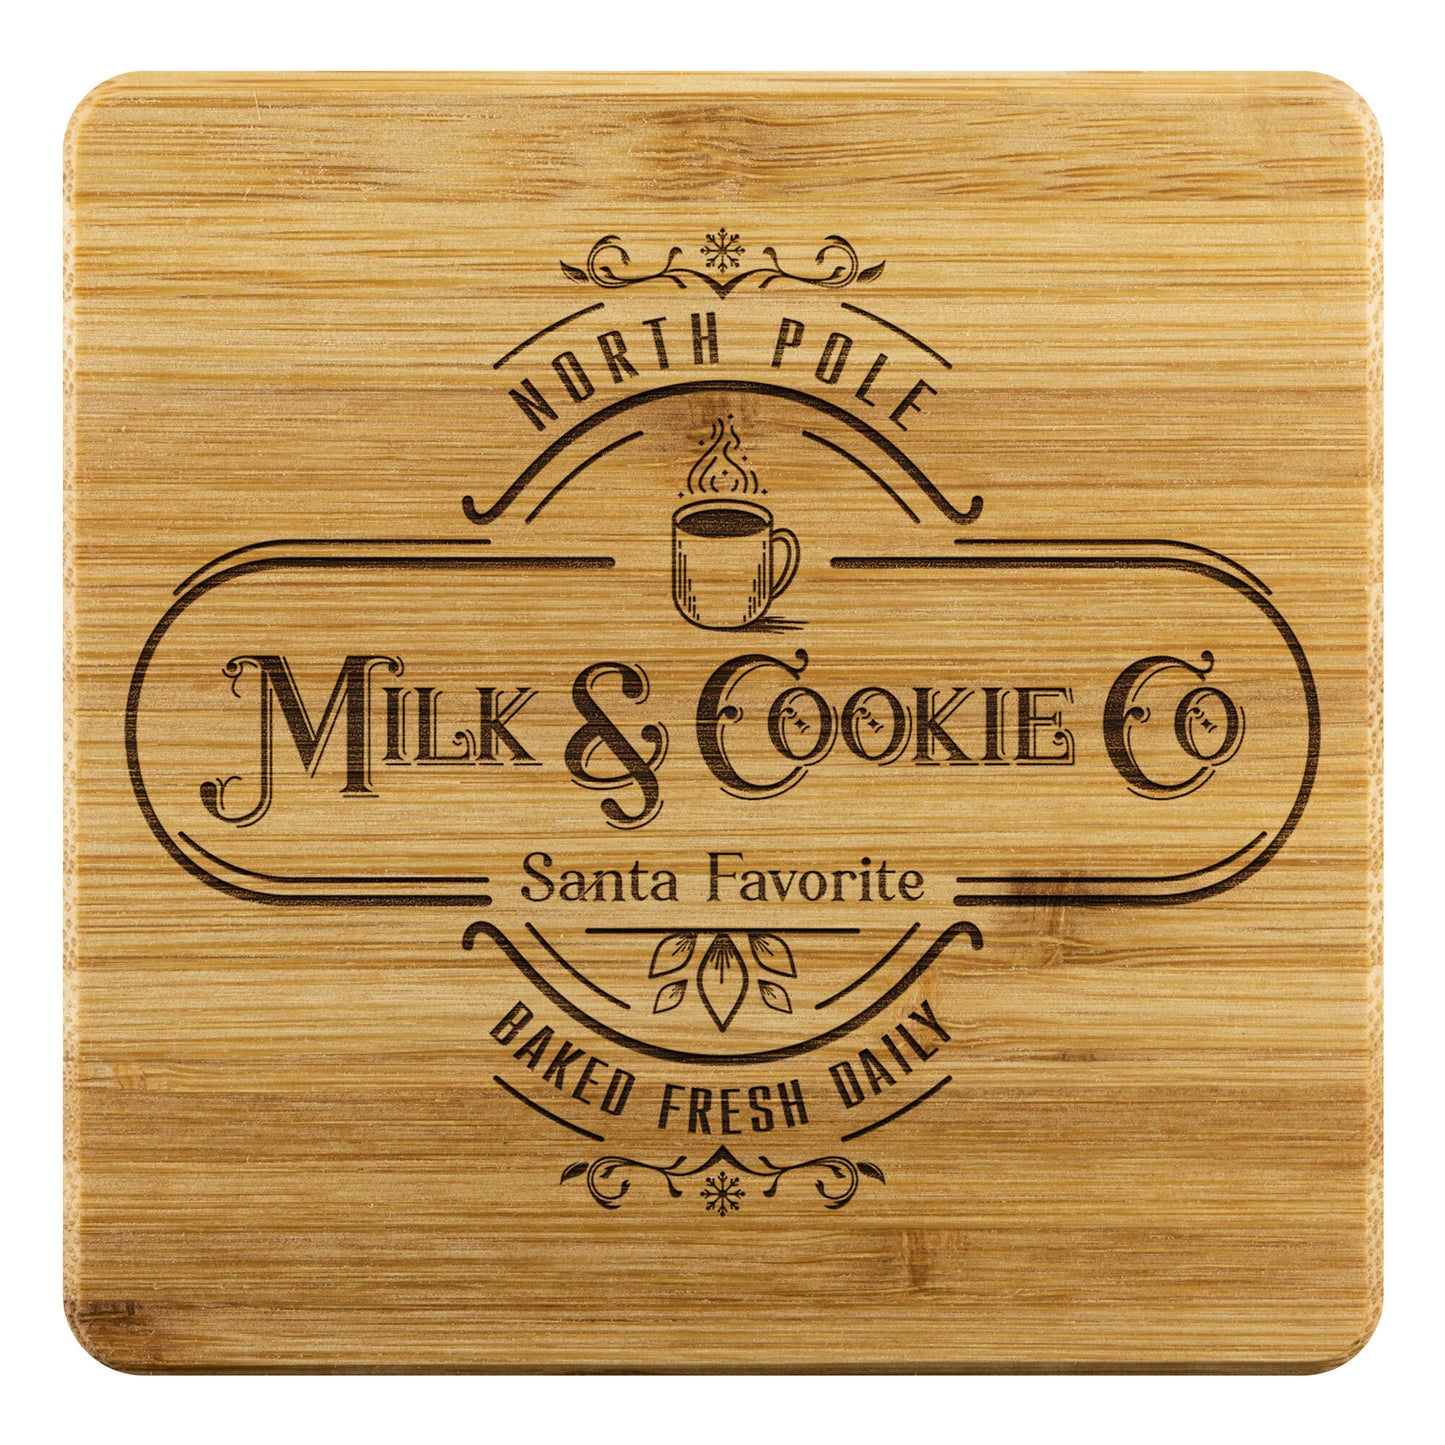 Milk and Cookie Co Christmas Bamboo Coasters - Set of 4 teelaunch